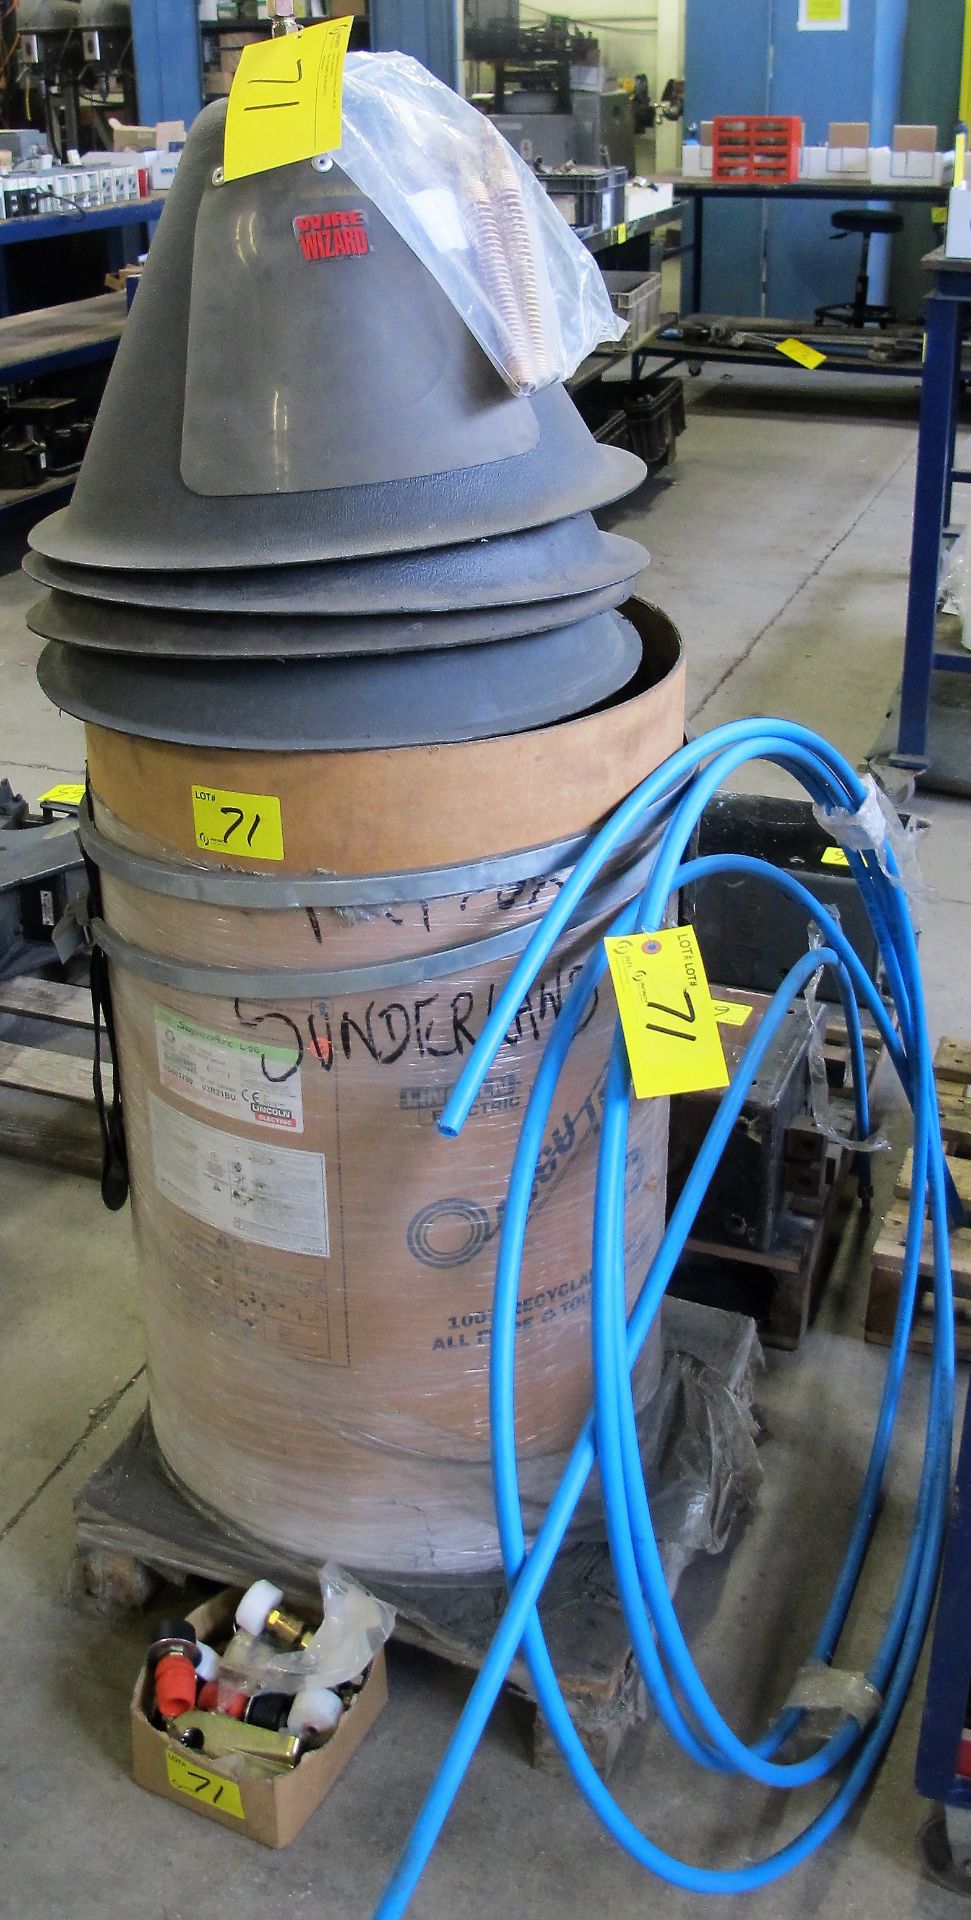 SUPERARC L-56 WELDING WIRE, APPROX. 500LB W/ WIRE WIZARD FEEDERS, PARTS, ETC.